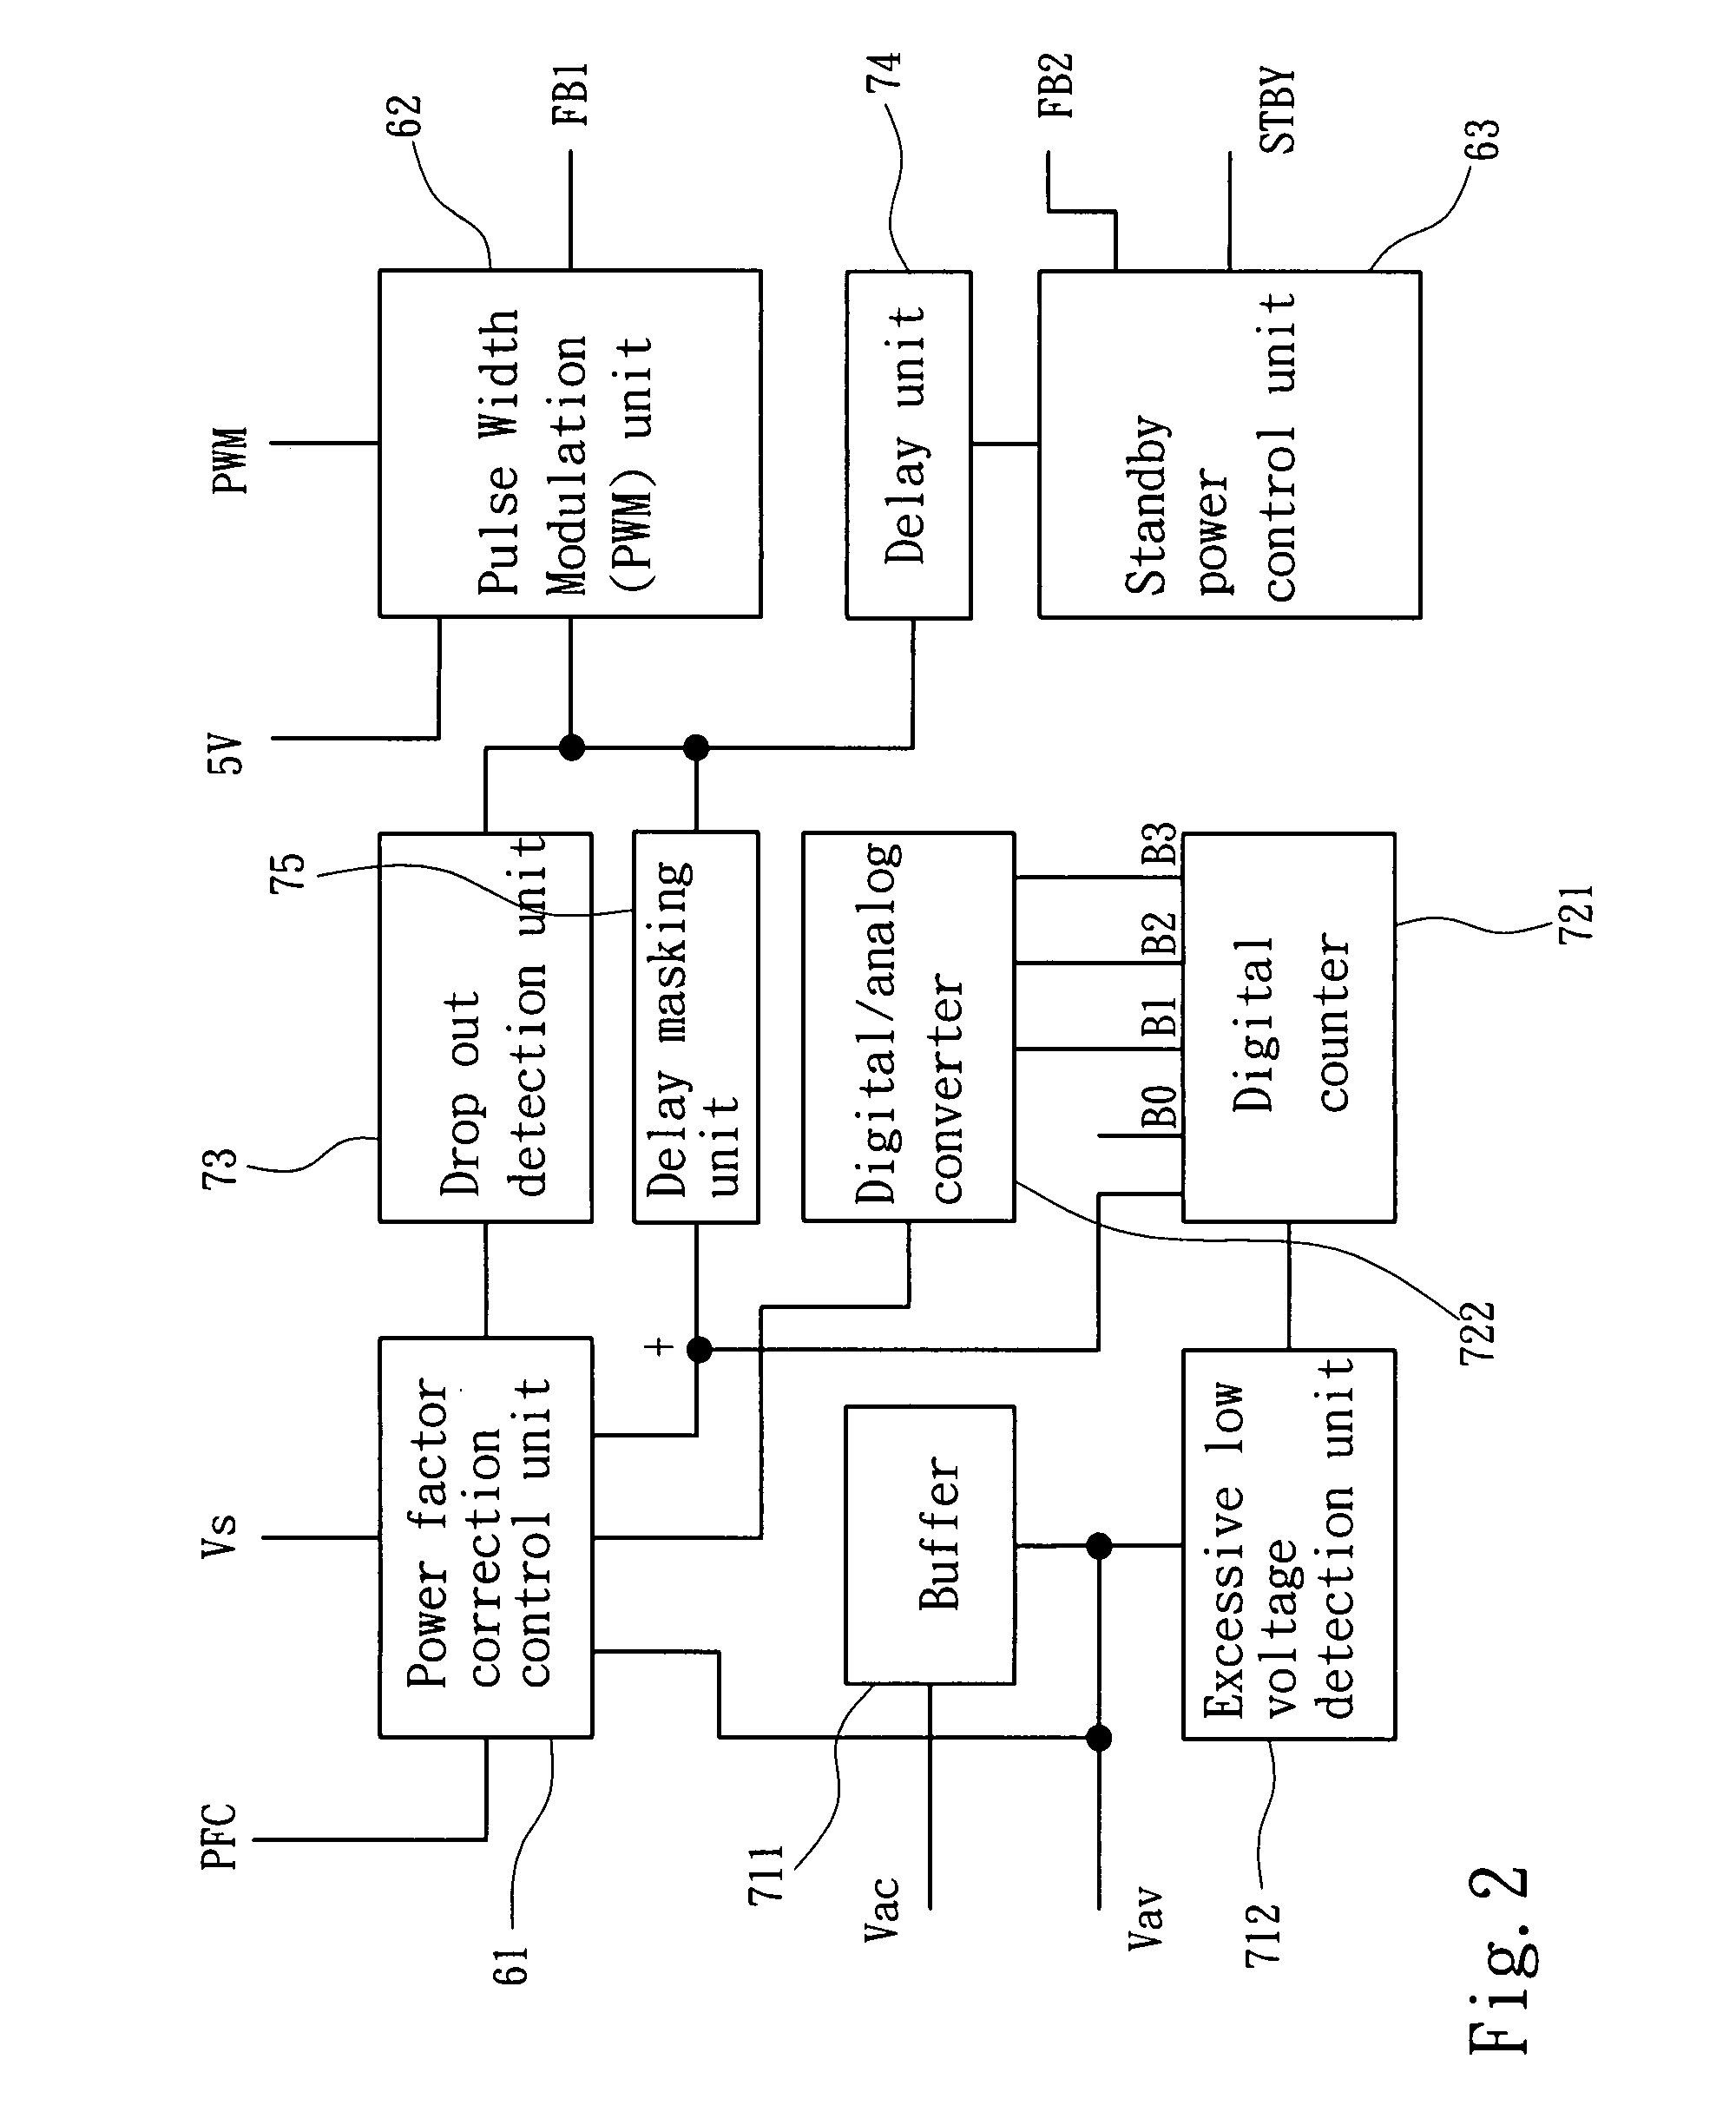 Power abnormal protection circuit